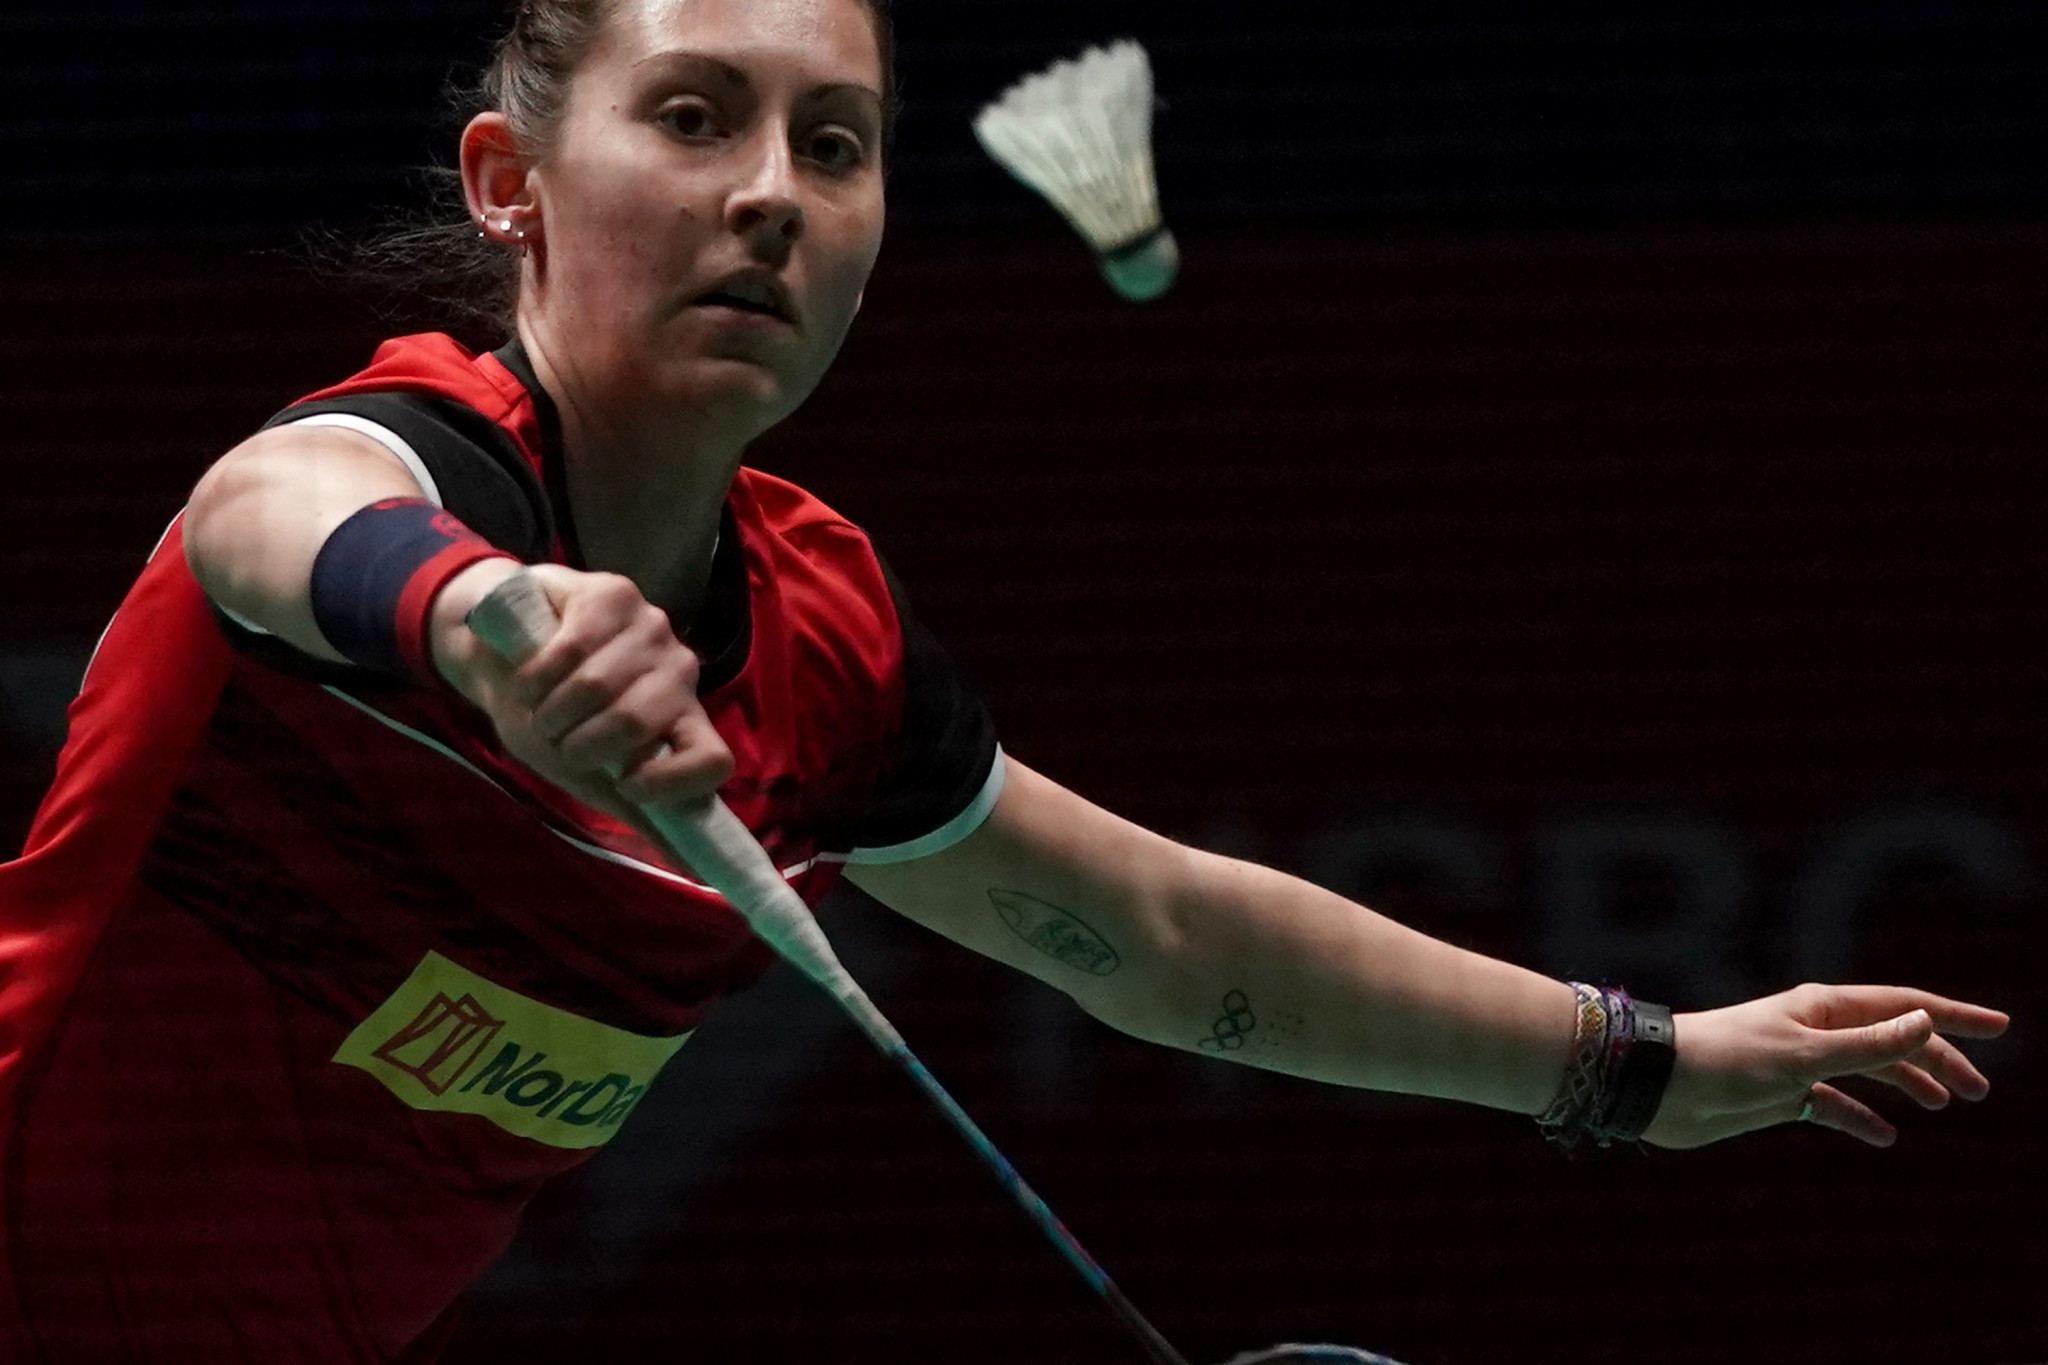 Top seed Gilmour claims hard-fought win to reach BWF Russian Open semi-finals